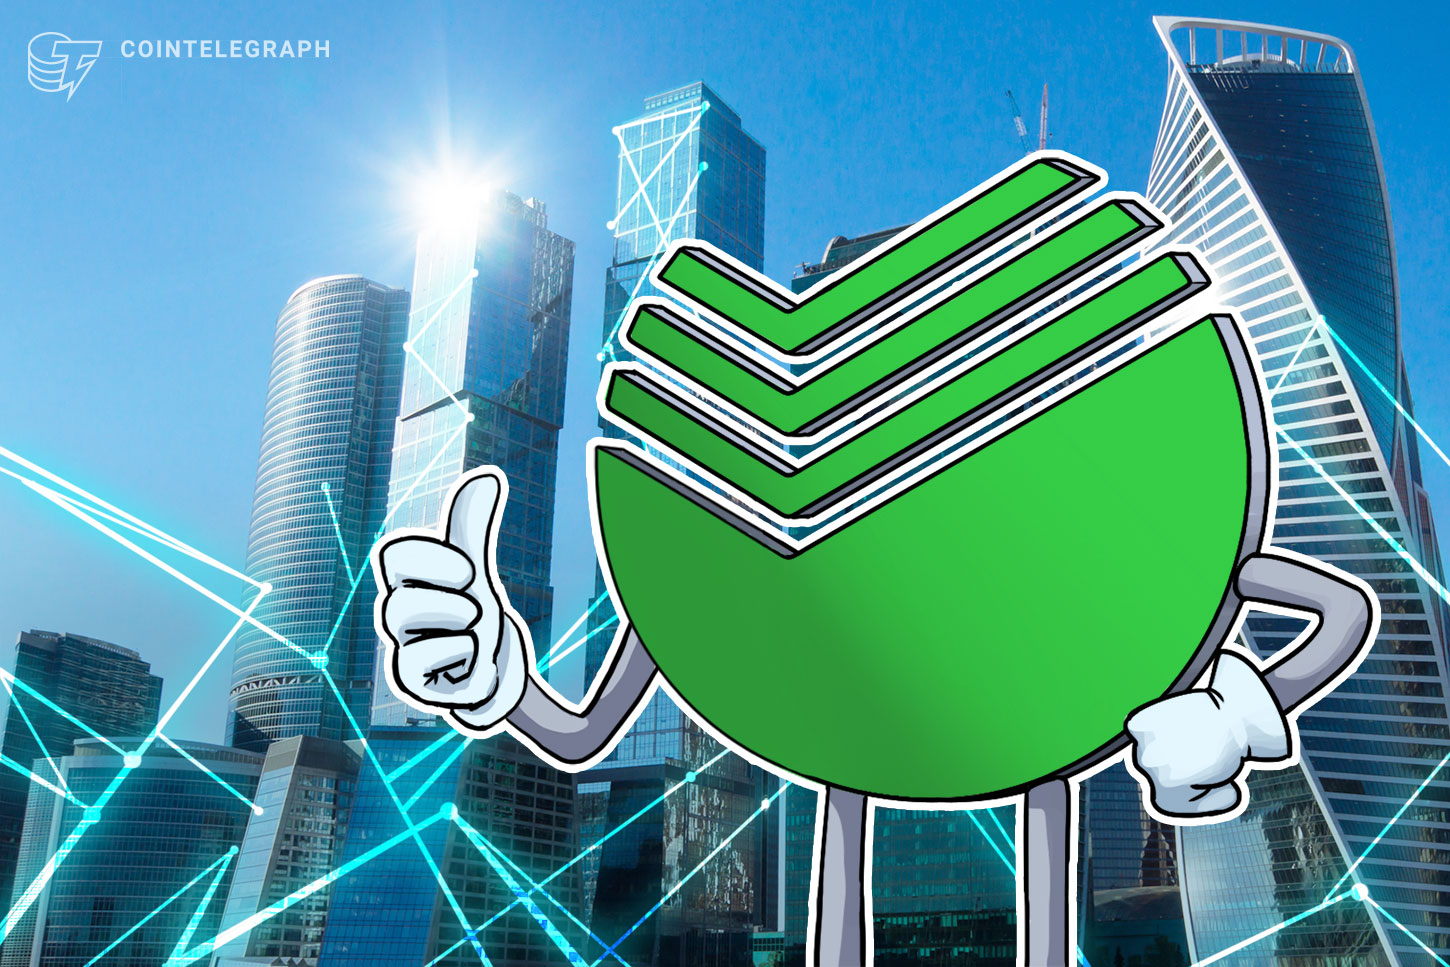 Russia’s Sberbank plans launch of its personal crypto token, the “Sbercoin”